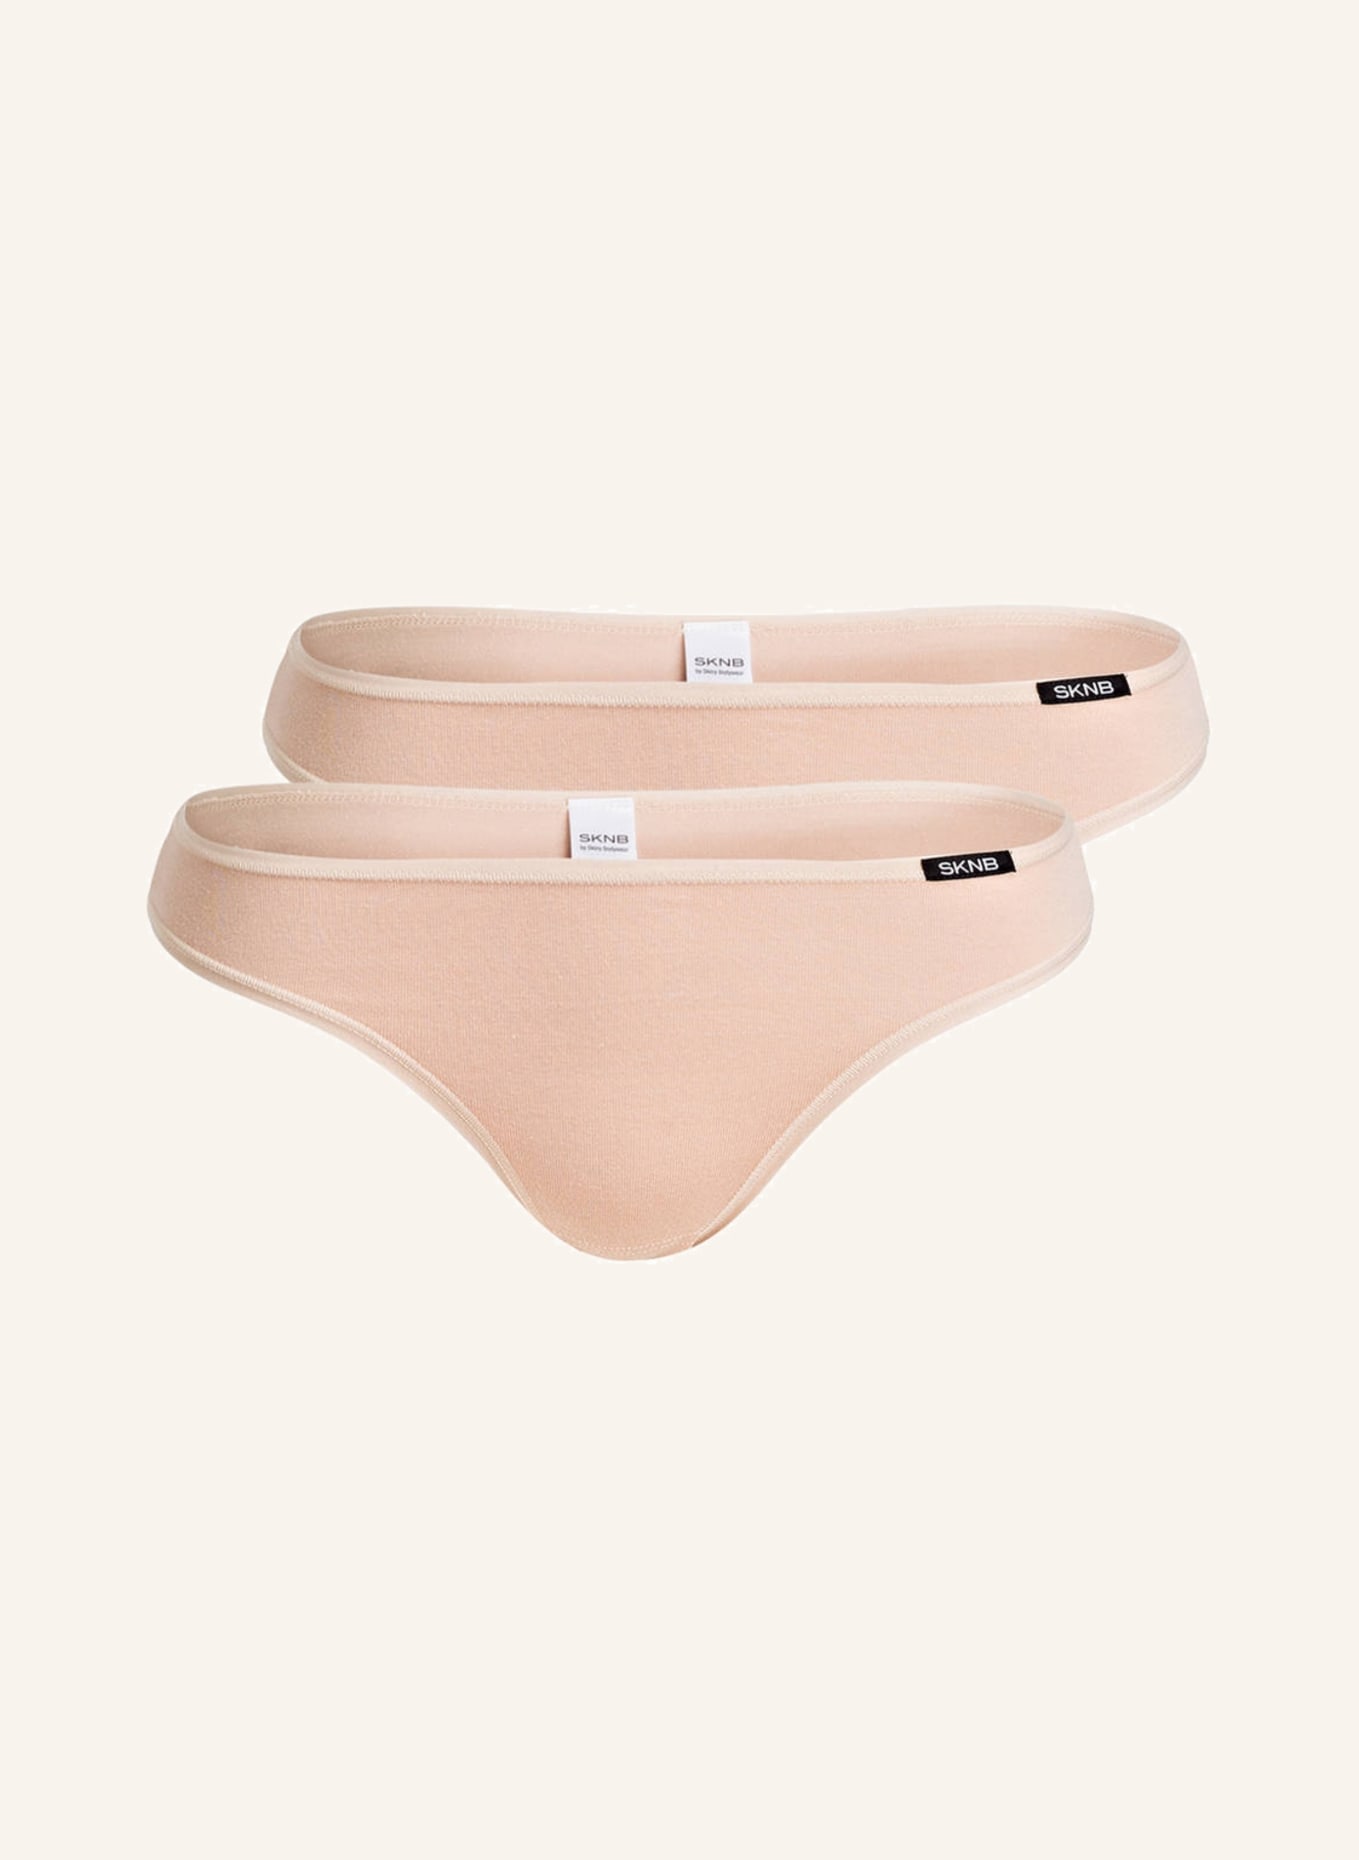 Skiny 2er-Pack Slips EVERY DAY IN COTTON ADVANTAGE, Farbe: NUDE (Bild 1)